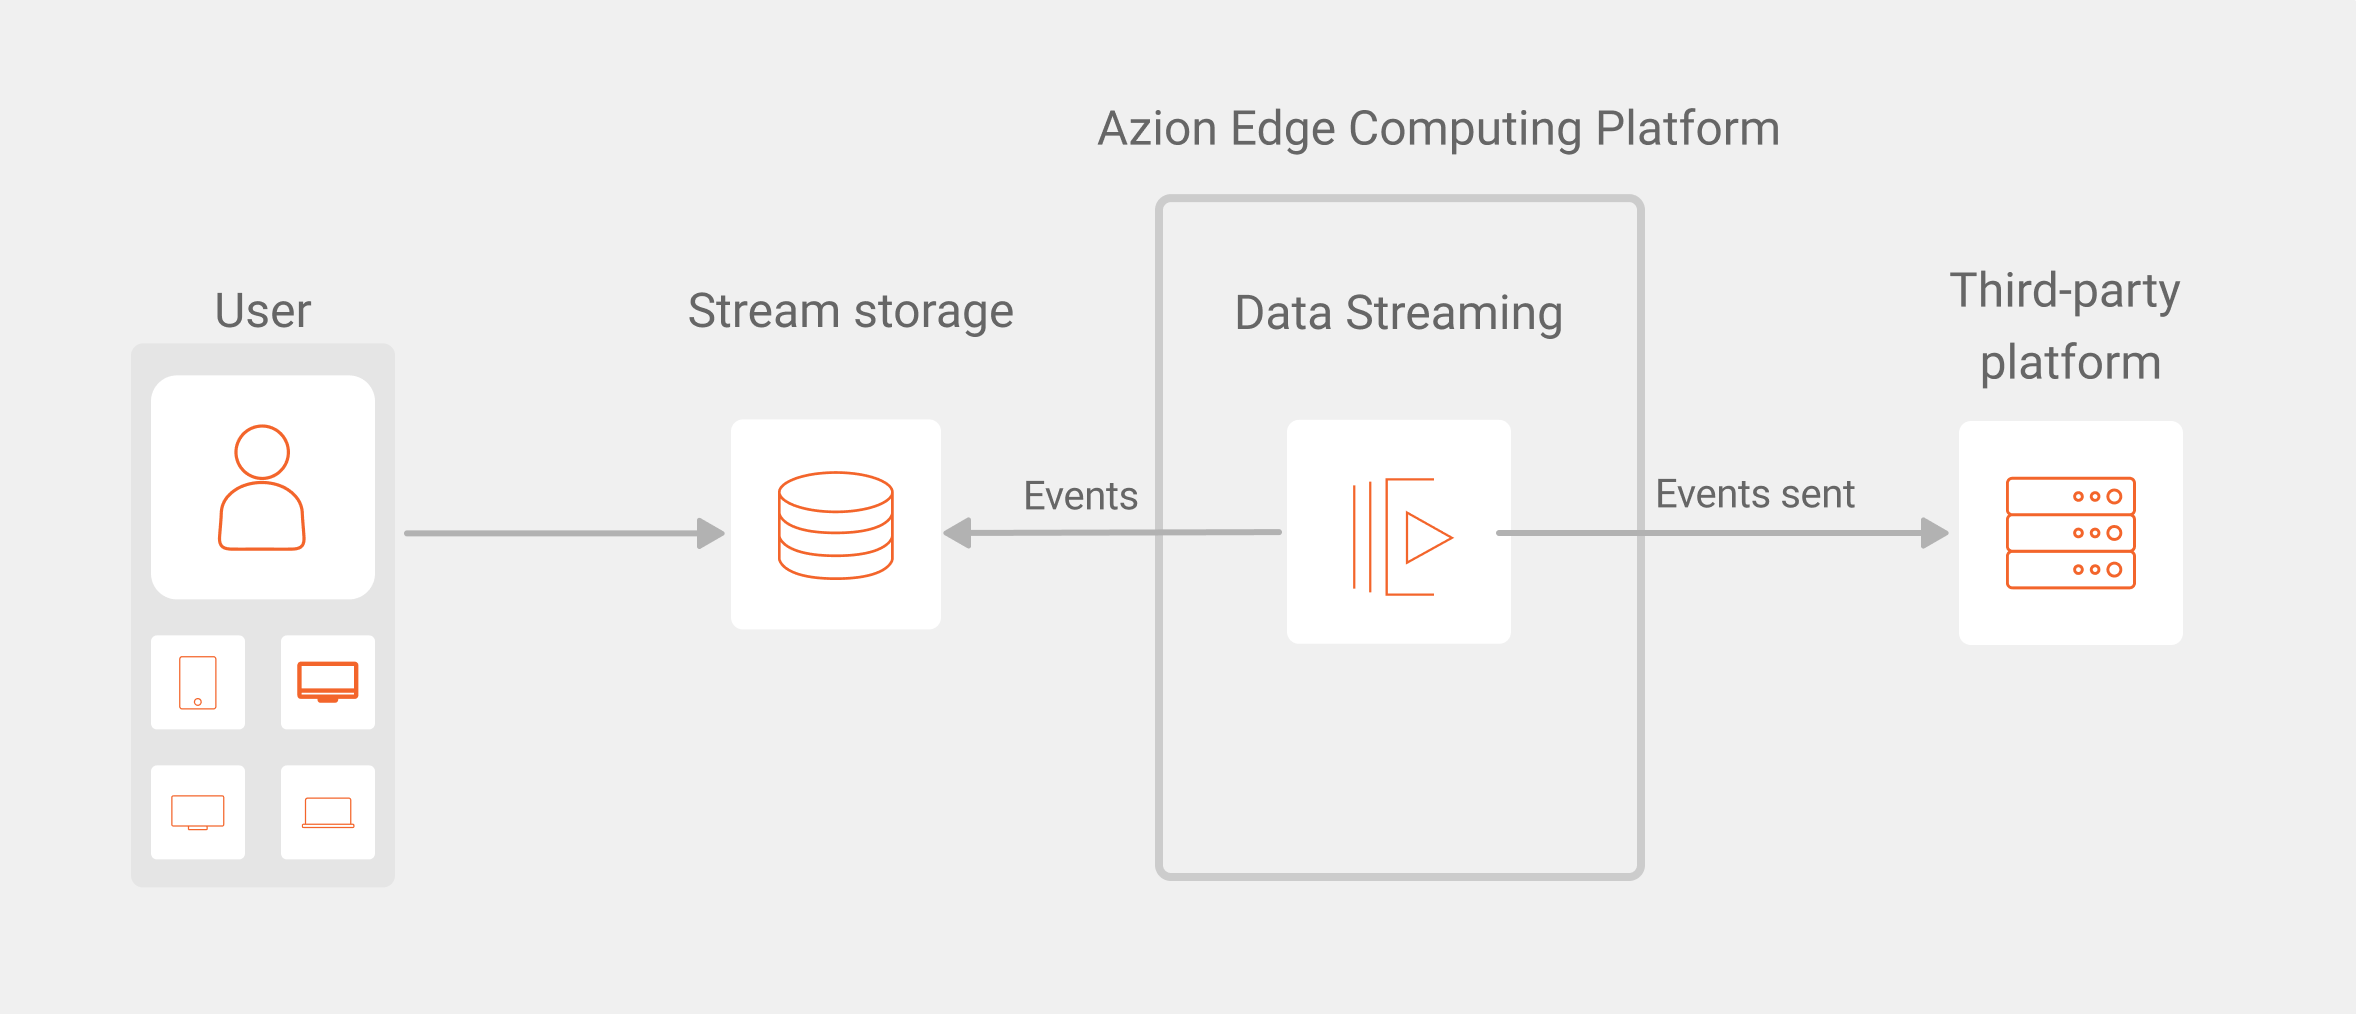 Overview of Data Stream flow